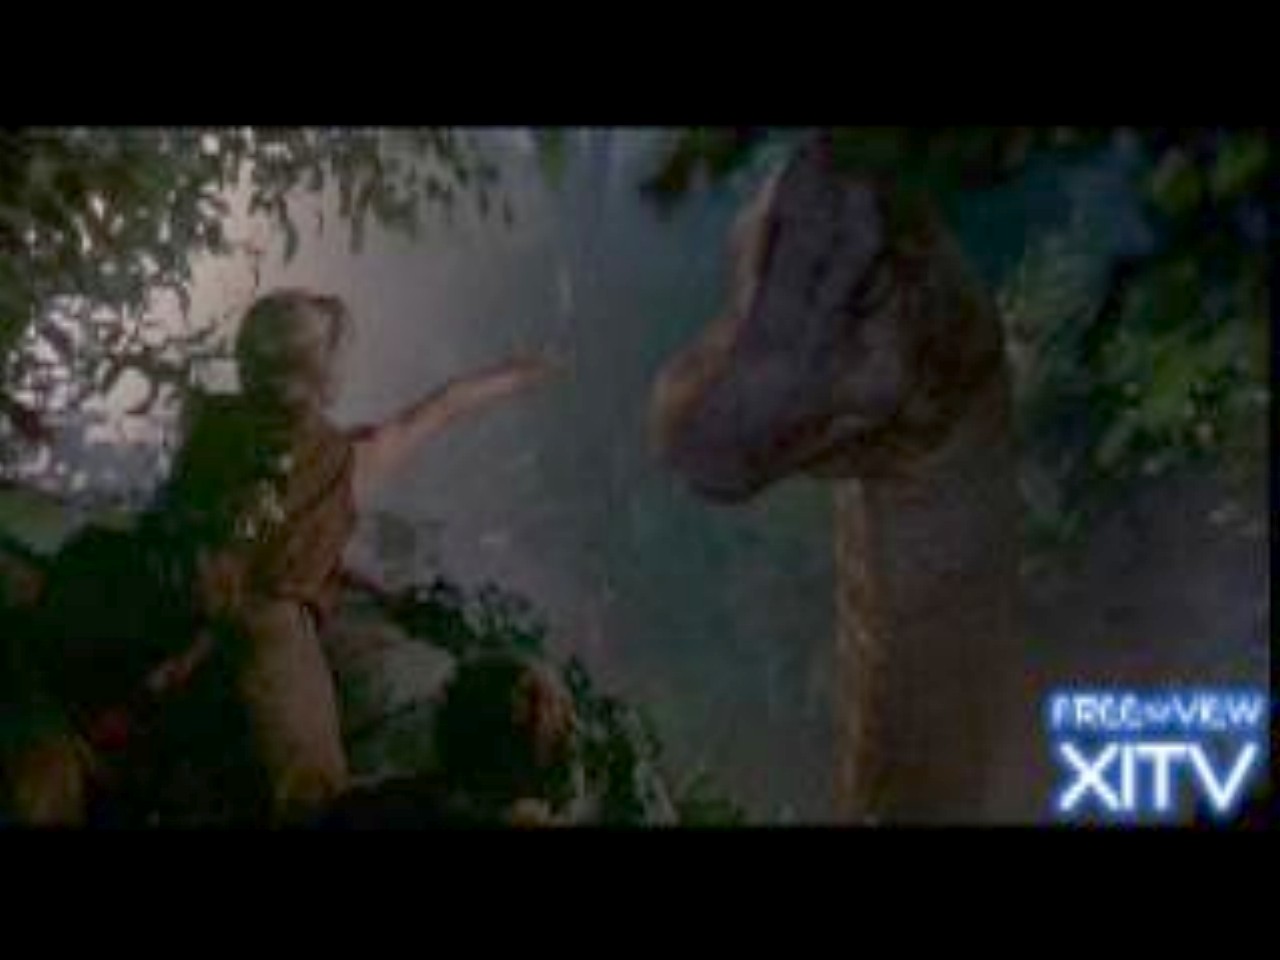 Watch Now! XITV FREE <> VIEW JURASSIC PARK! Starring Laura Dern! XITV Is Must See TV!